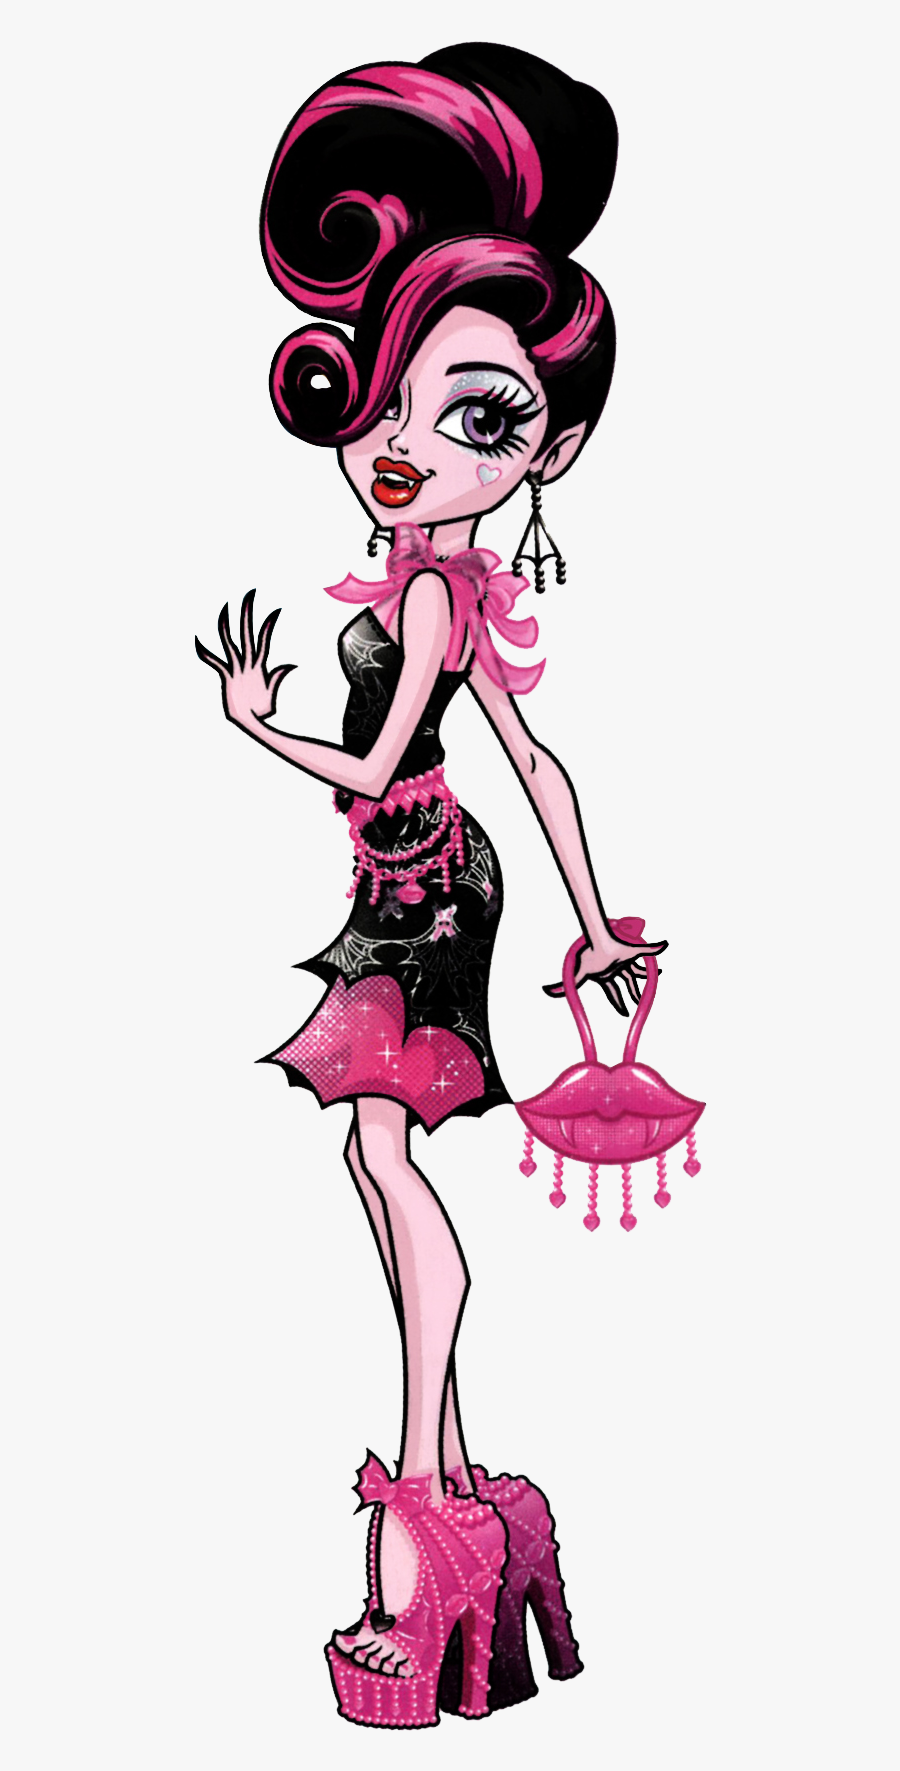 Draculaura Draculaura Is The Daughter Of Dracula - Monster High Artwork Frights Camera Action, Transparent Clipart